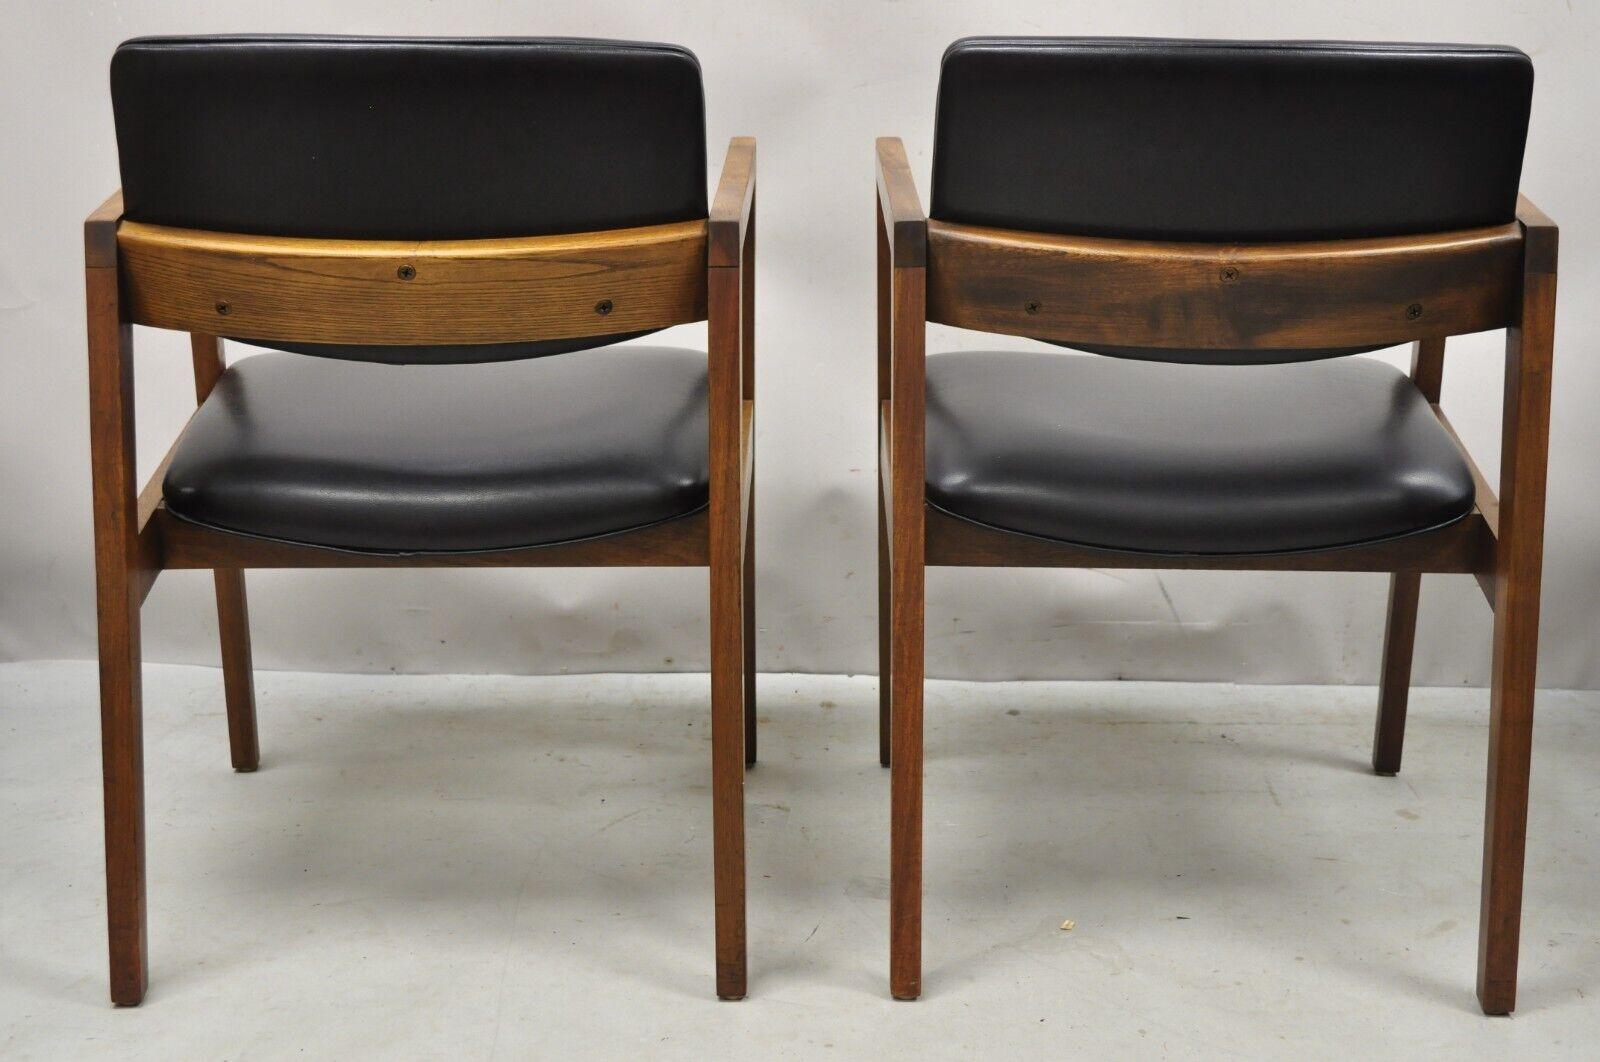 Pair Vintage Mid-Century Modern Walnut Arm Chair Lounge Chair by United Chair Co For Sale 4